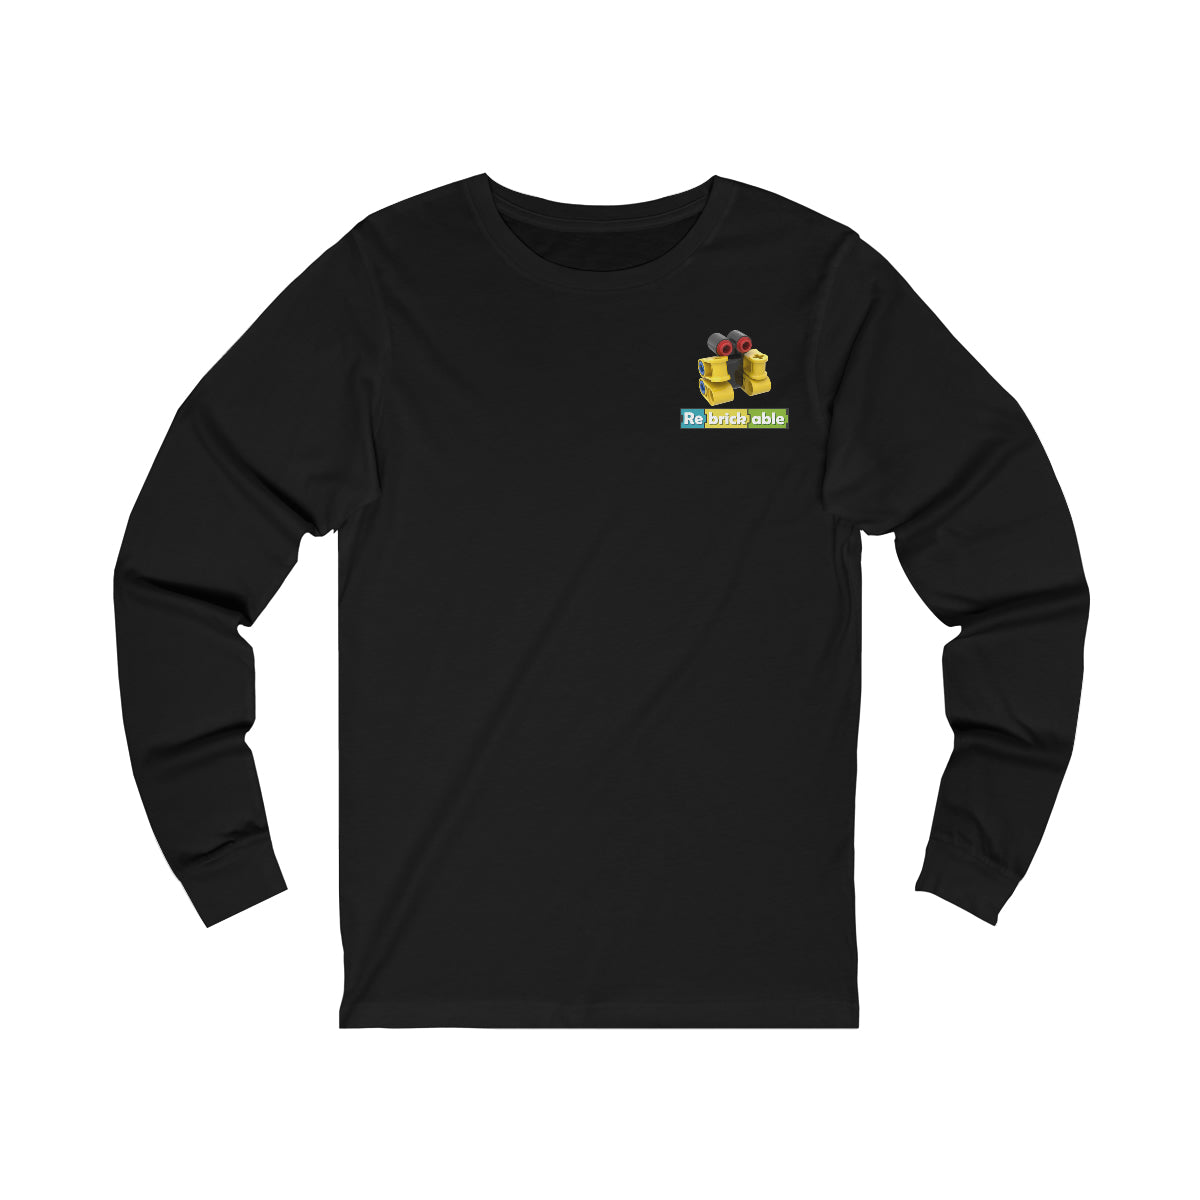 Unisex Jersey Long Sleeve Tee (small front logo, shipped from UK)